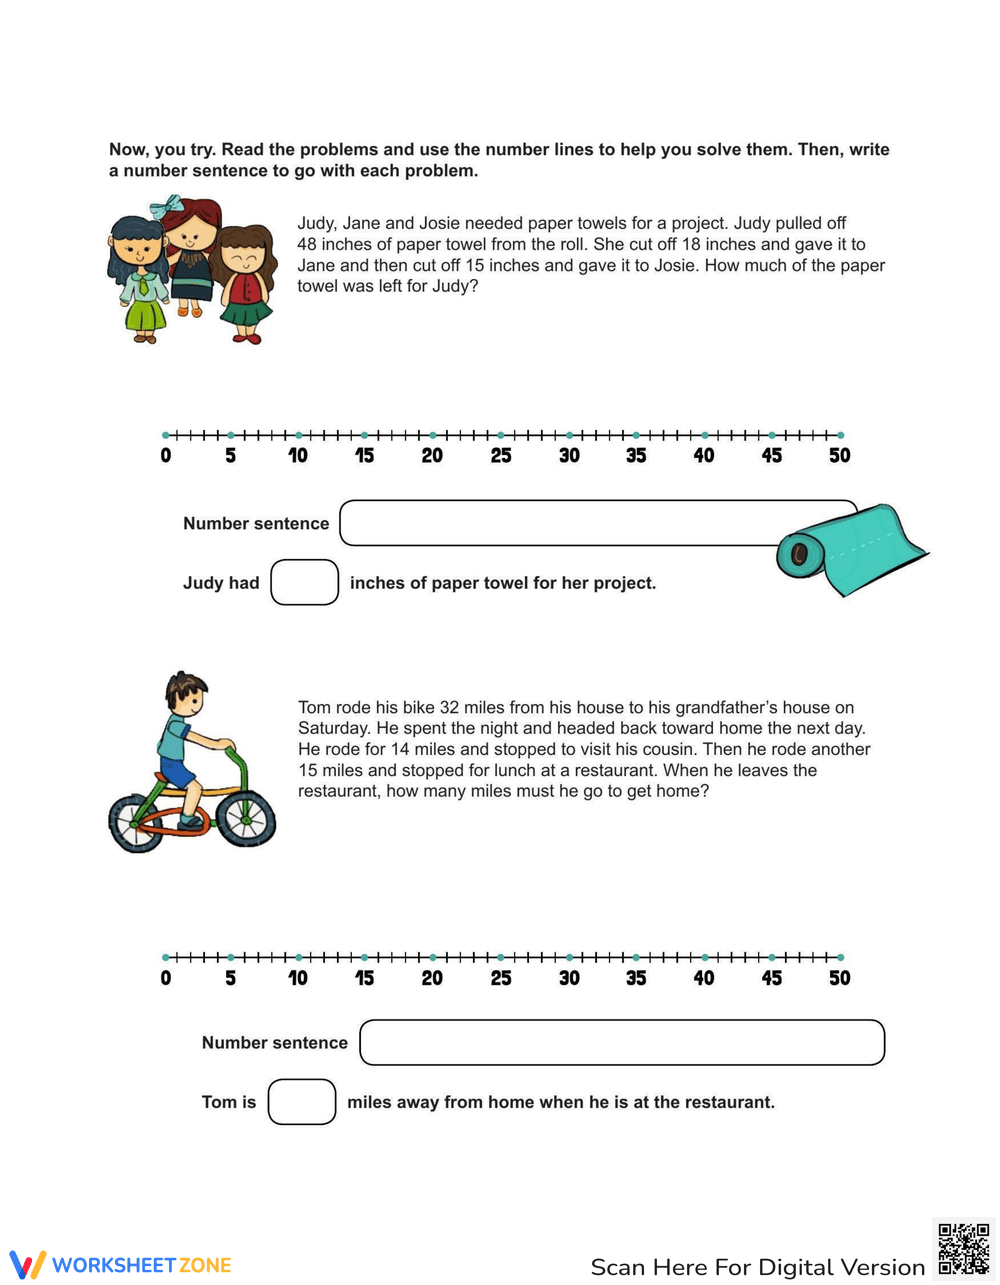 Solving Multi-Step Subtraction Problems Using A Number Line